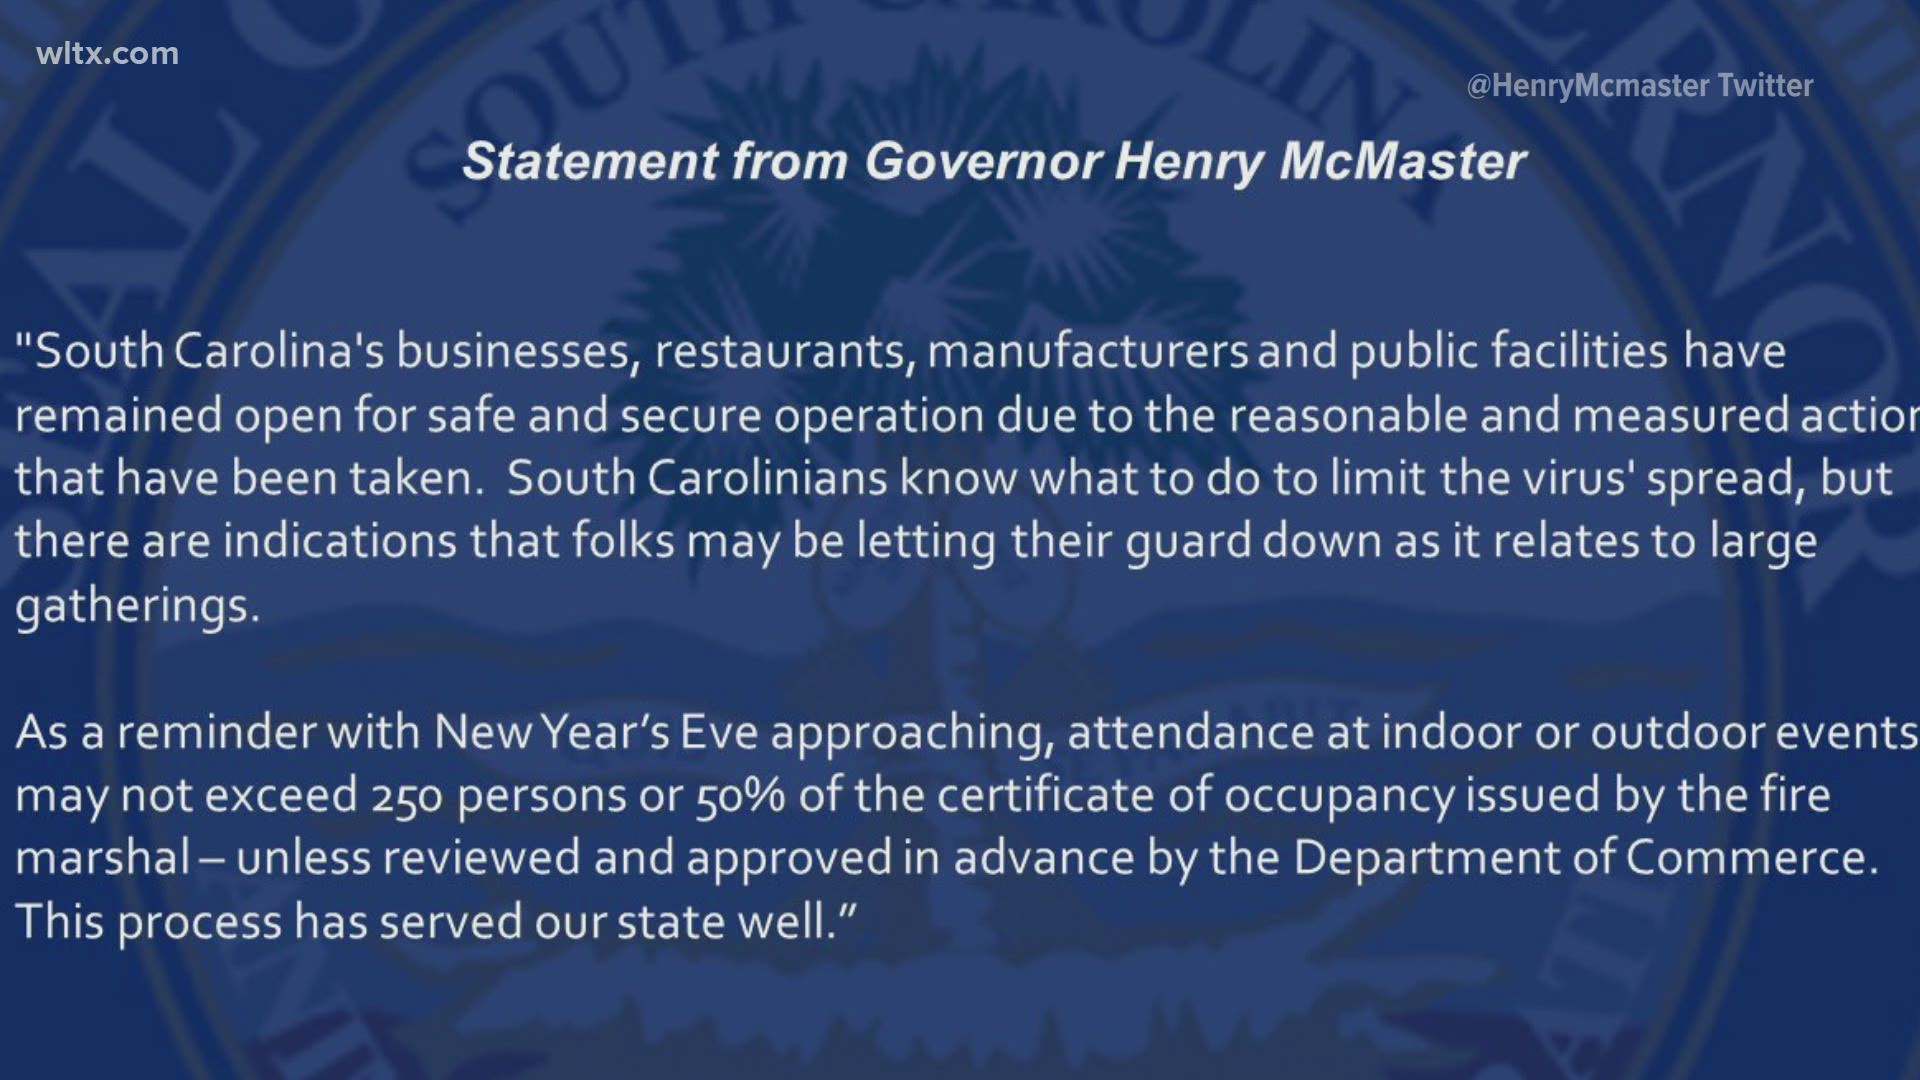 South Carolina Governor Henry McMaster urged citizens to practice COVID-19 precautions when celebrating the new year.